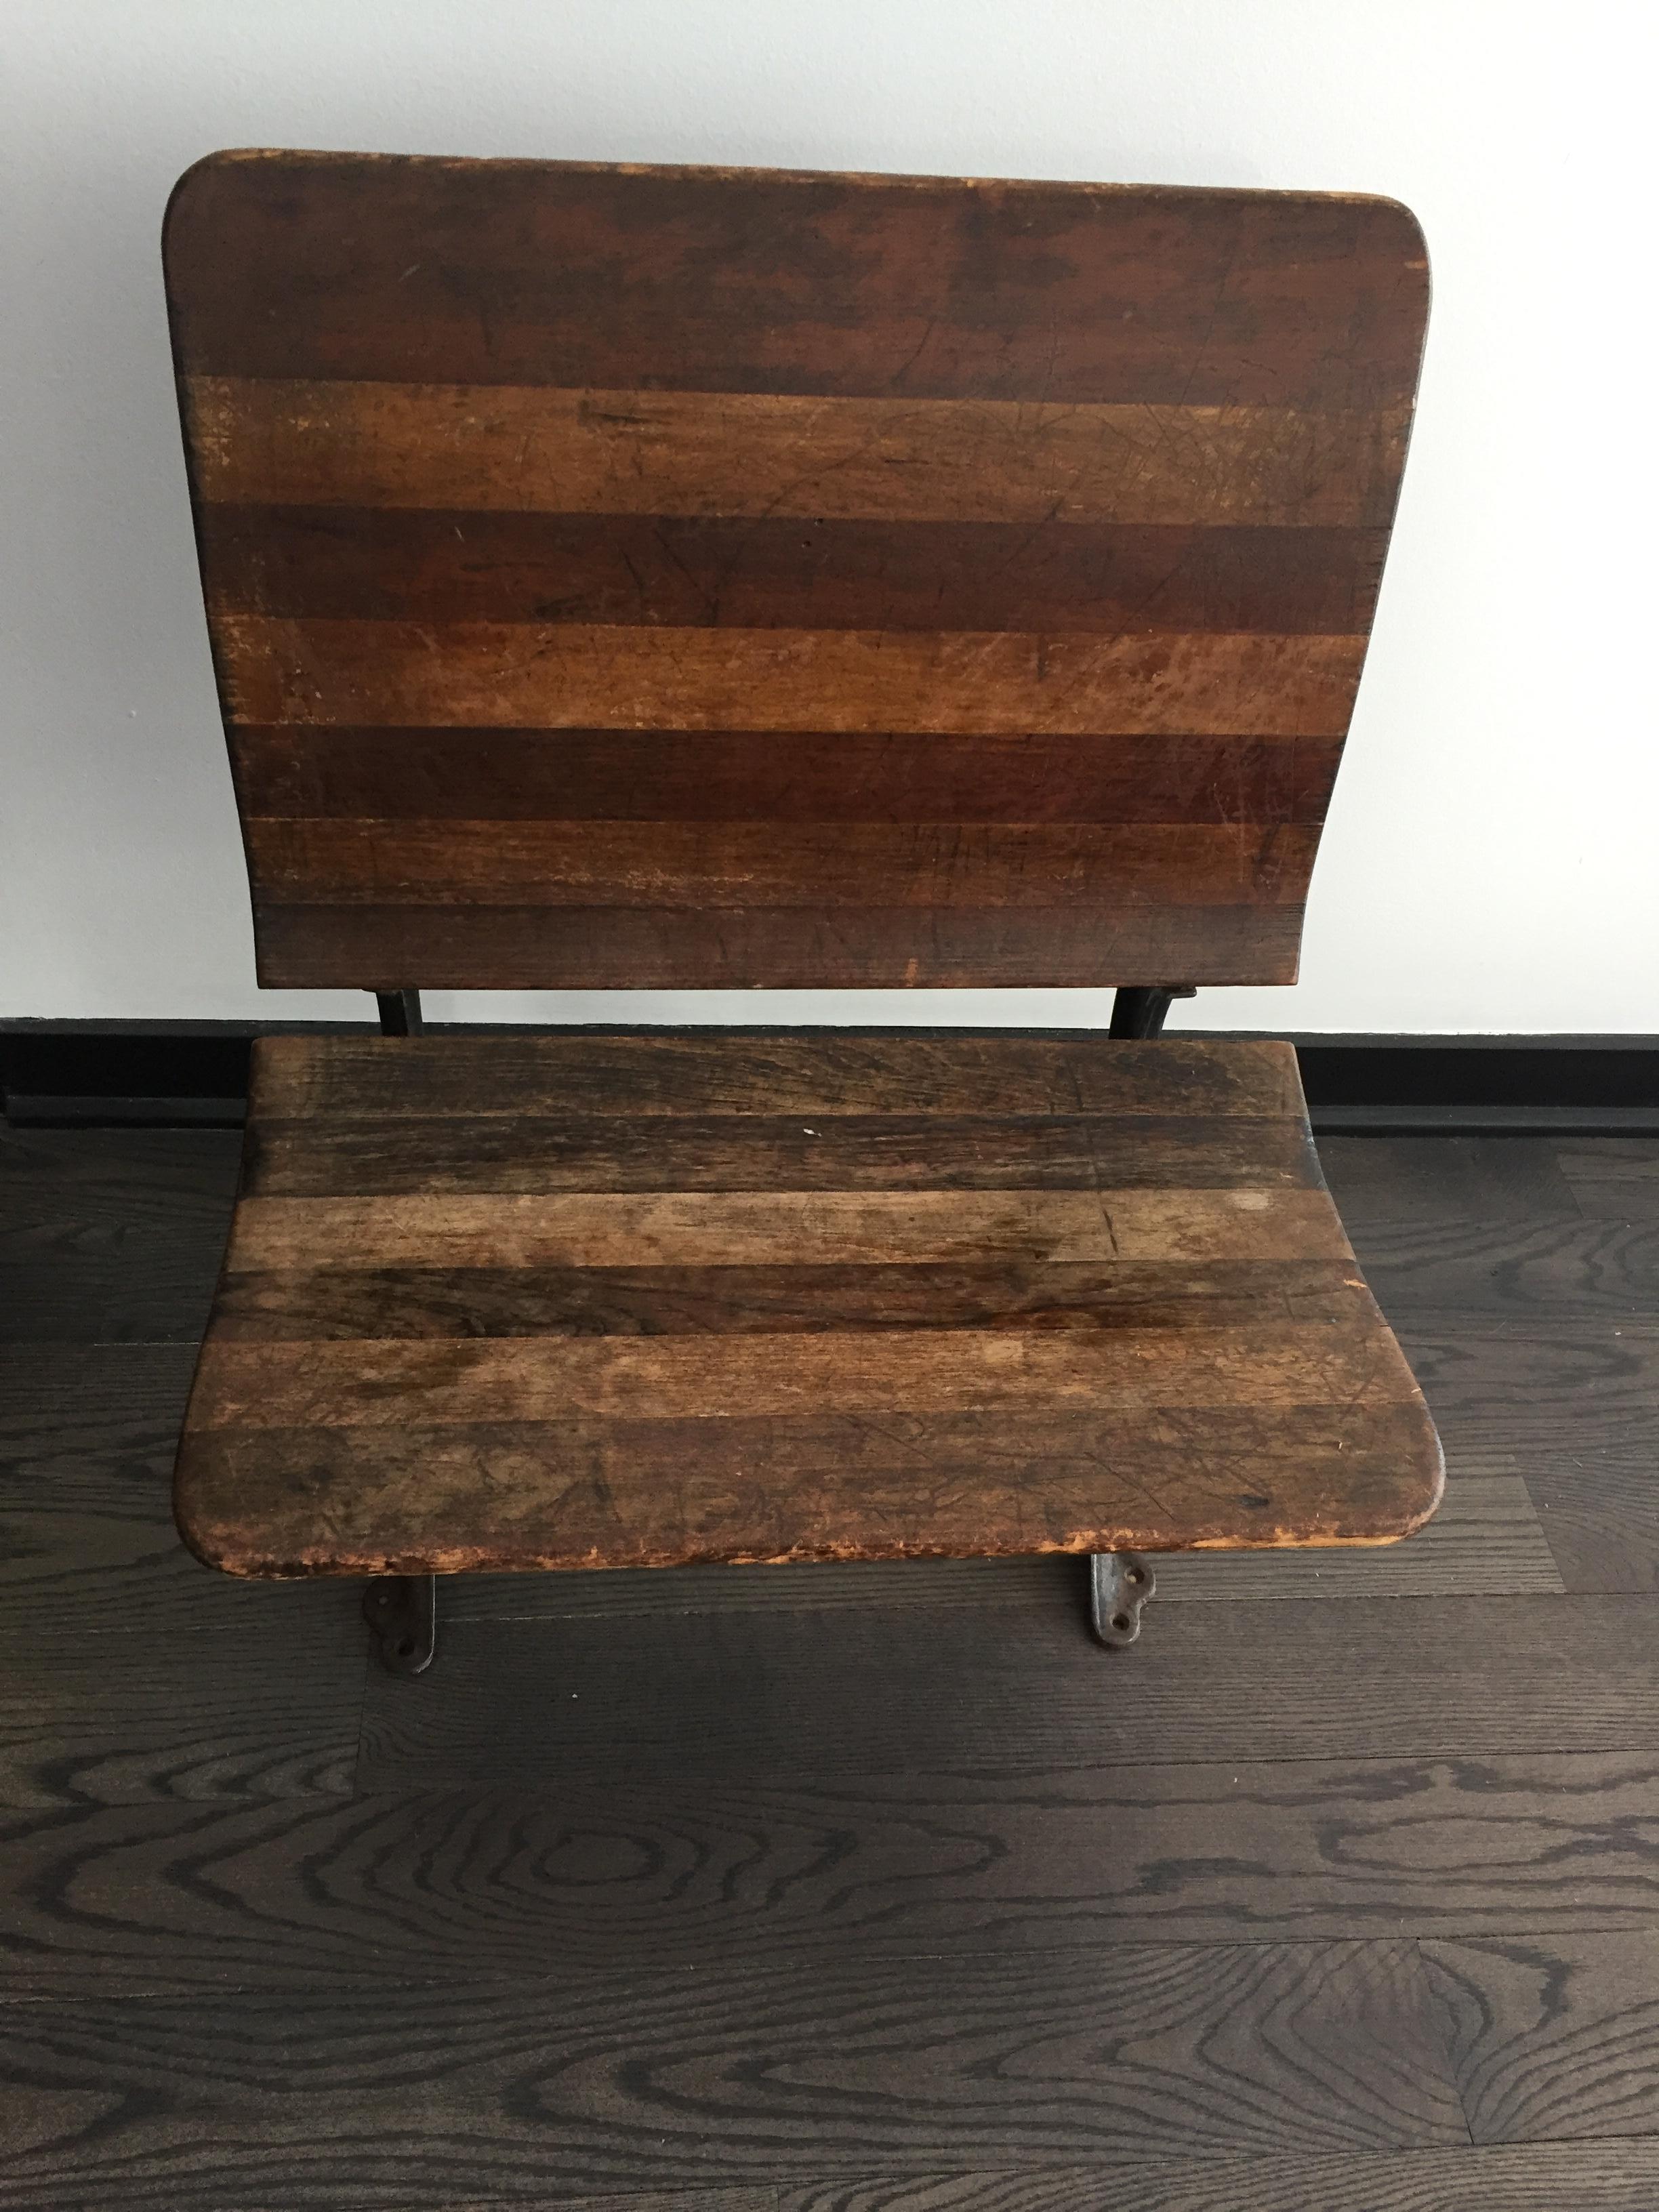 Vintage School House Desk, purchased at auction, is a rustic and charming piece.
Made of hand sewn wood and is collapsible.
  